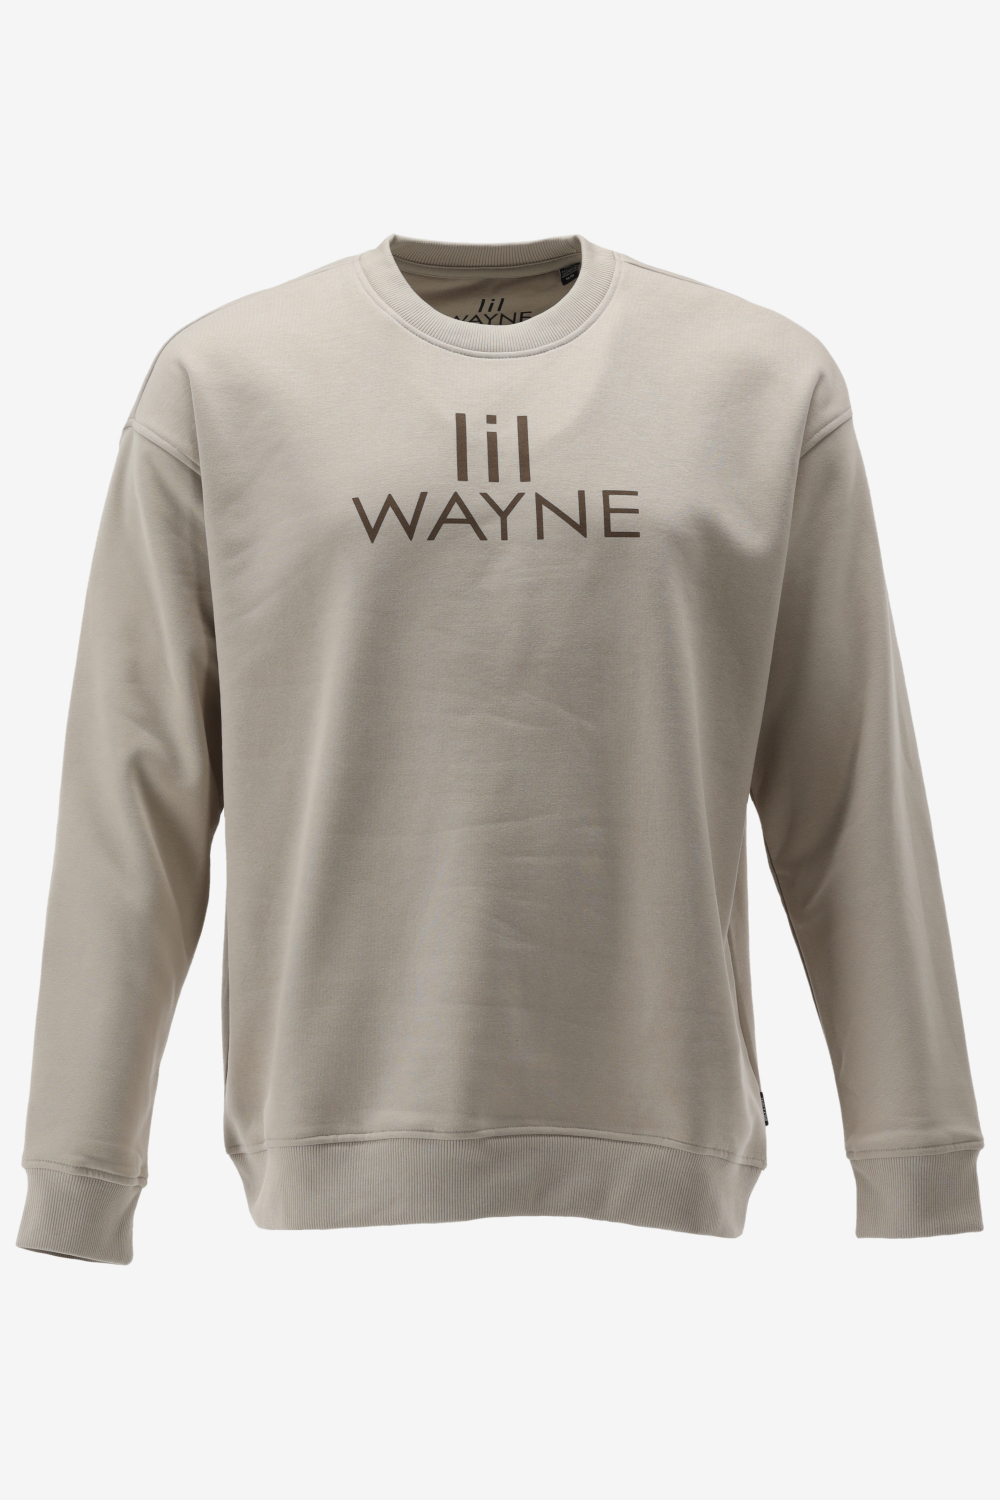 Only Sons Sweater LILWAYNE